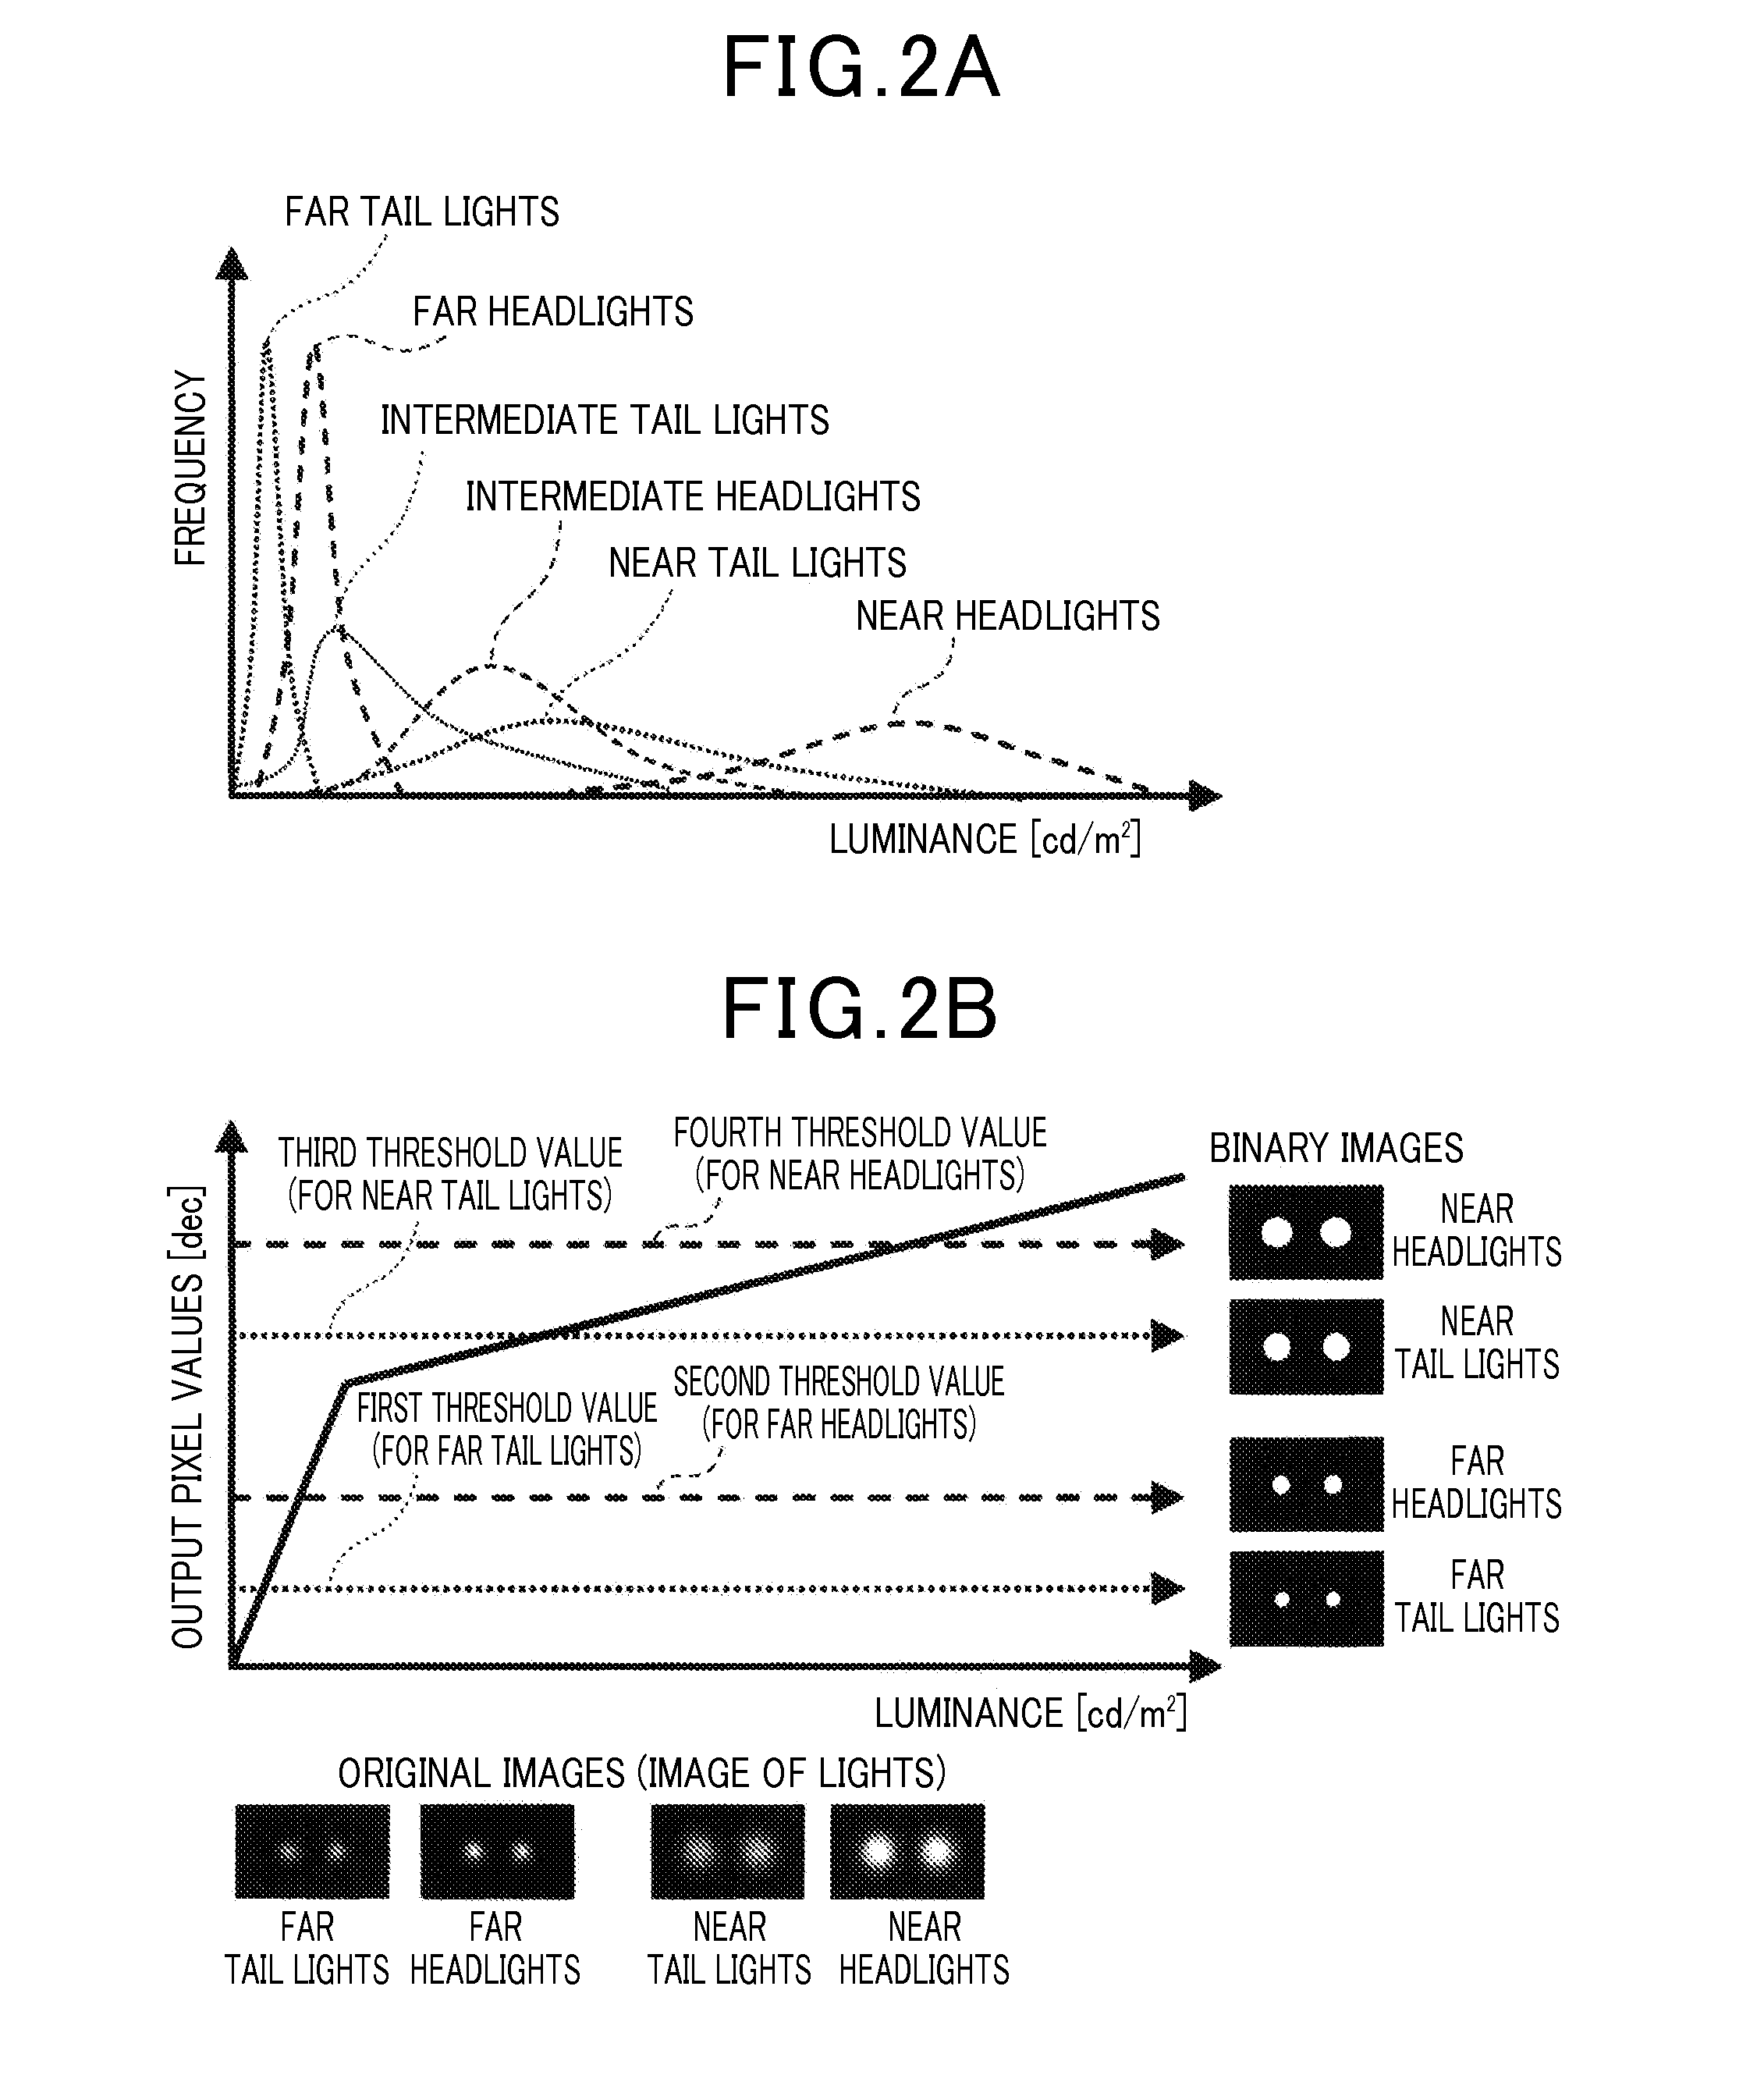 Recognition object detecting apparatus